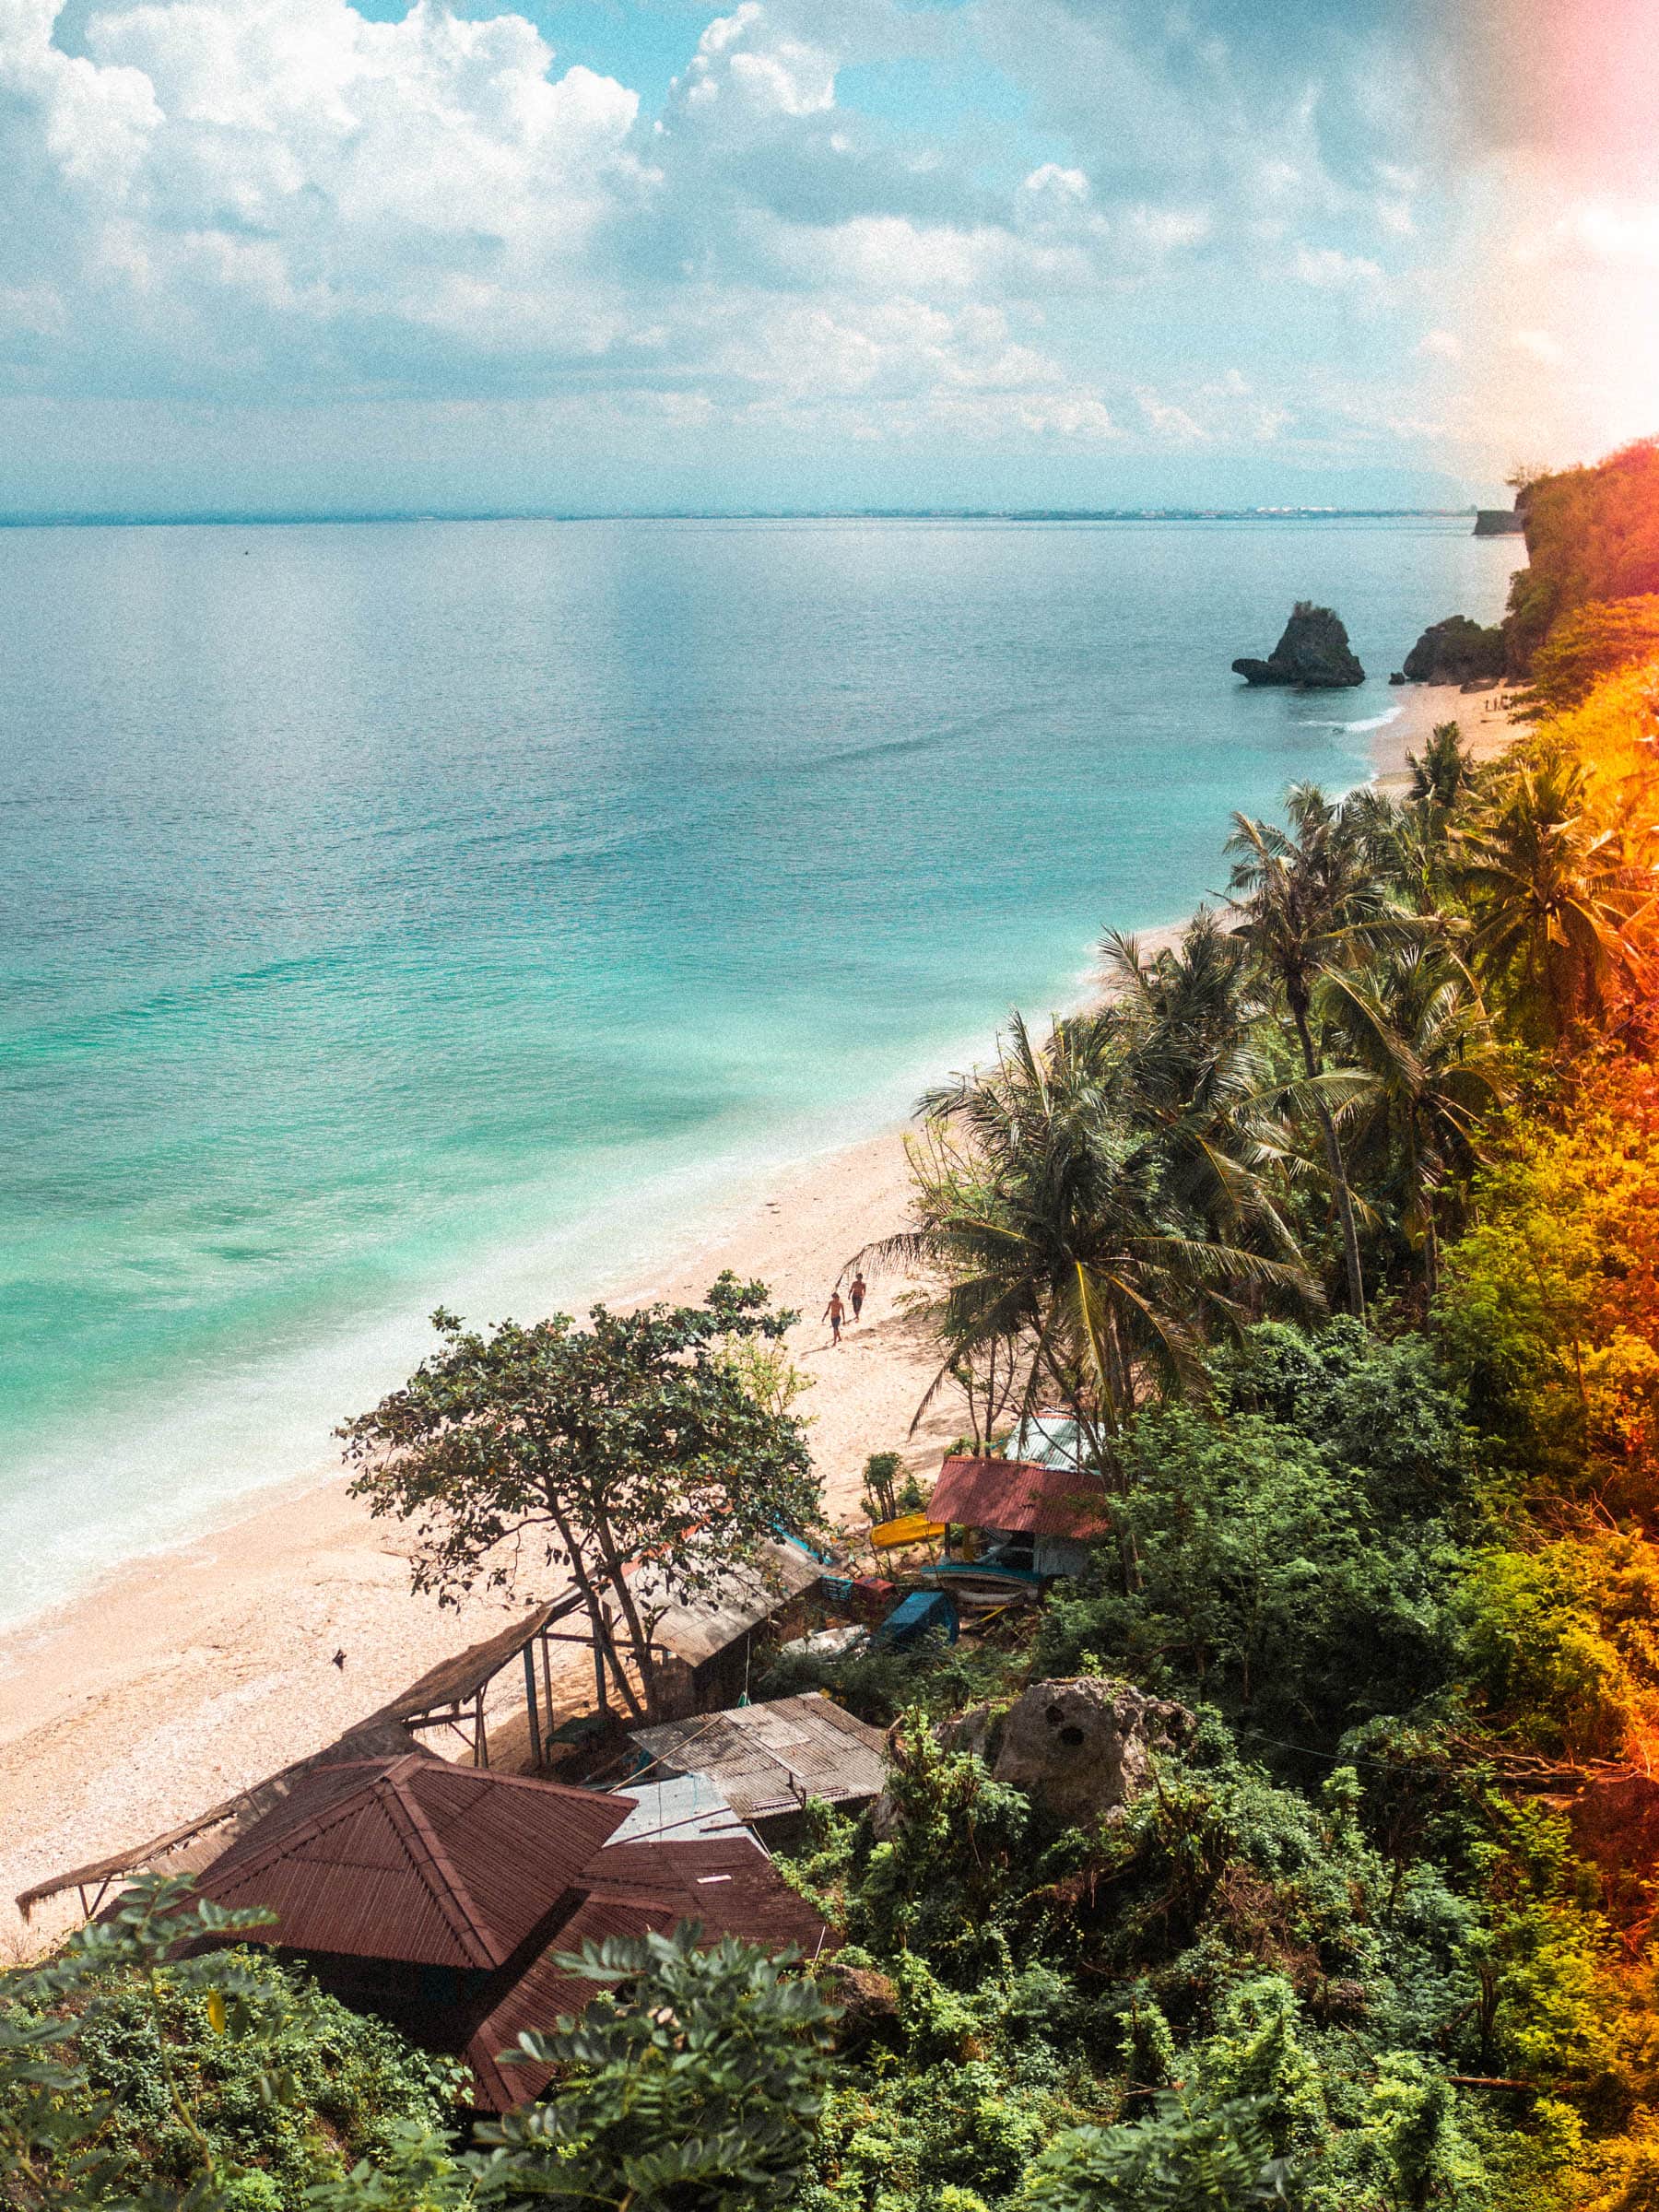 Discover the best Bali captions and quotes for Instagram - View of the beautiful Padang Padang (Thomas Beach)